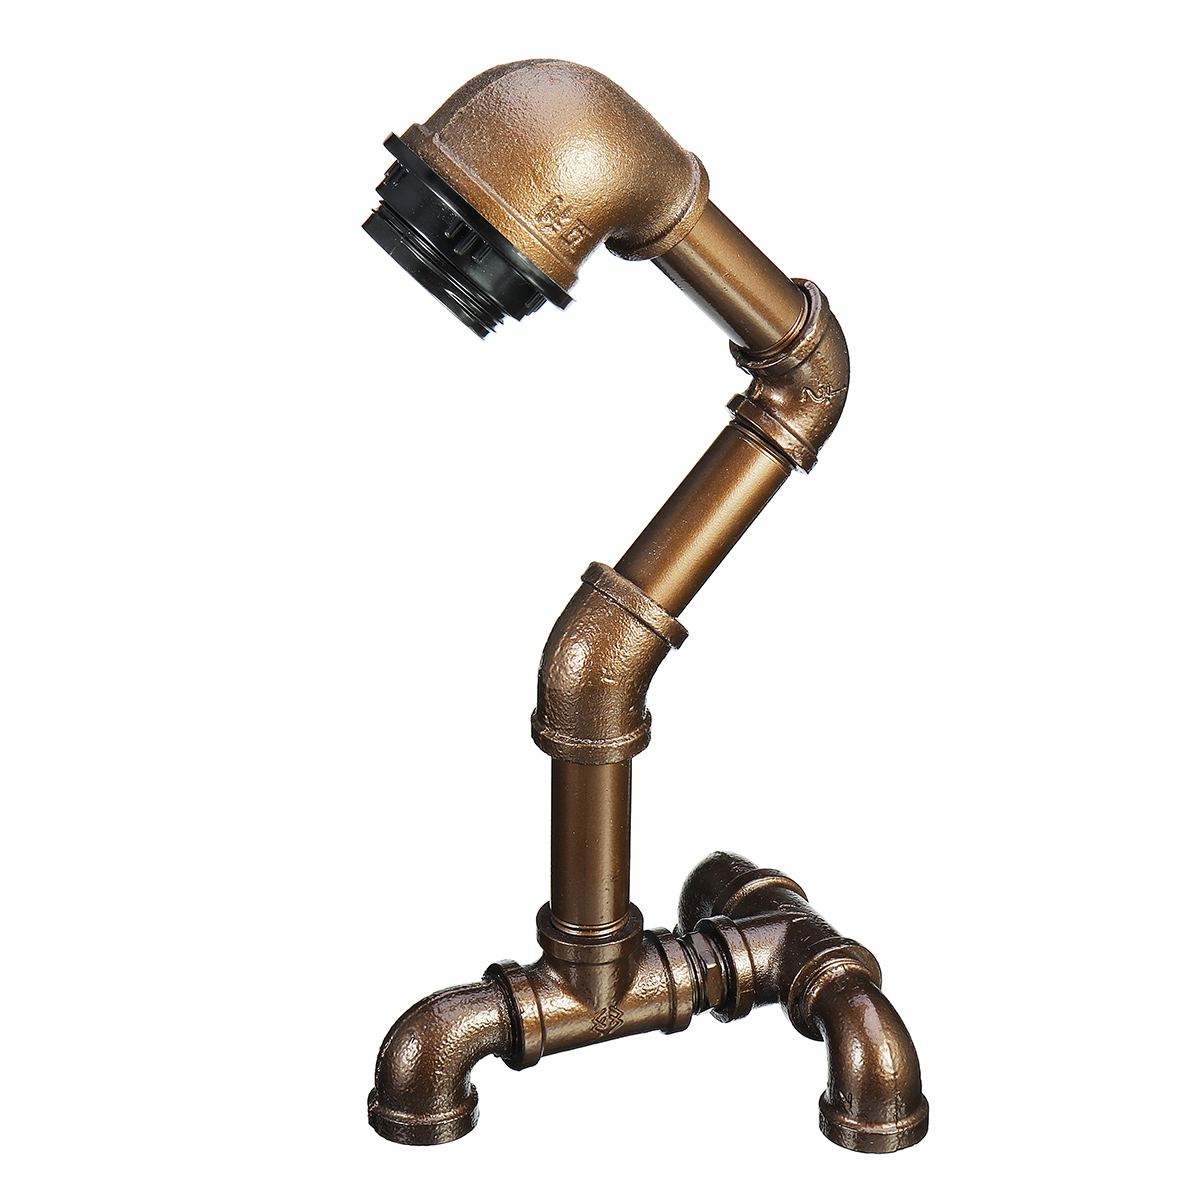 Vintage-Industrial-Robot-Light-Water-Pipe-Steampunk-Desk-Table-Lamp-Bedroom-E27-1431974-5